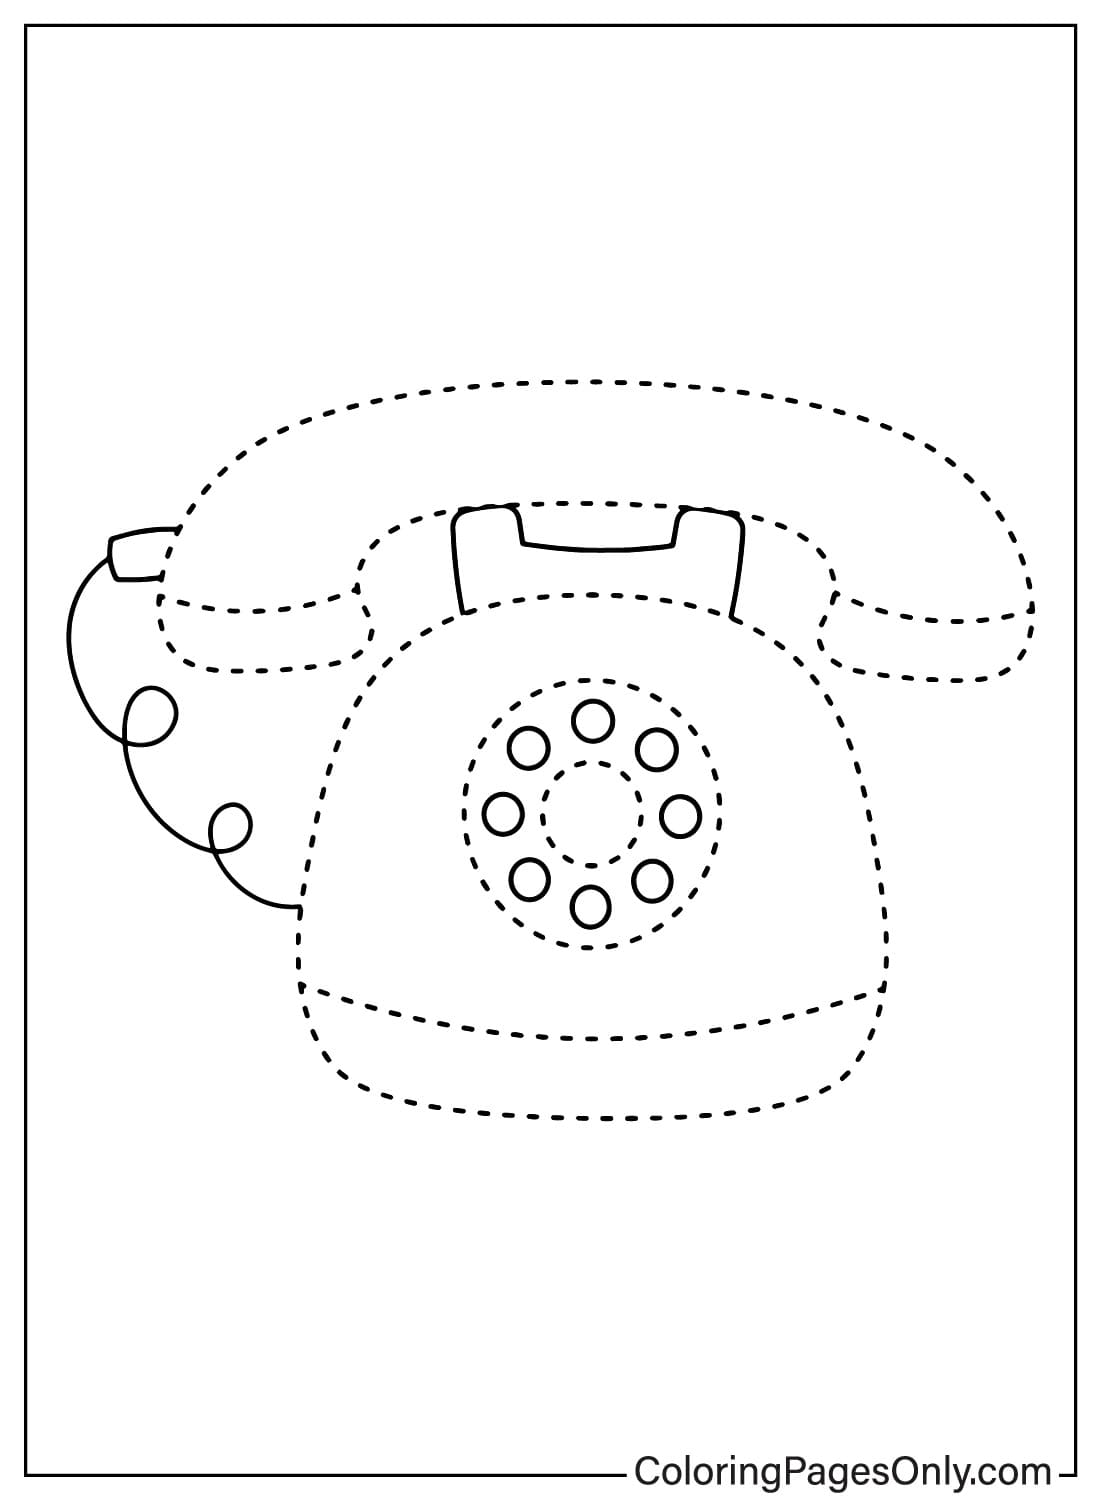 Landline Tracing Coloring Page from Tracing